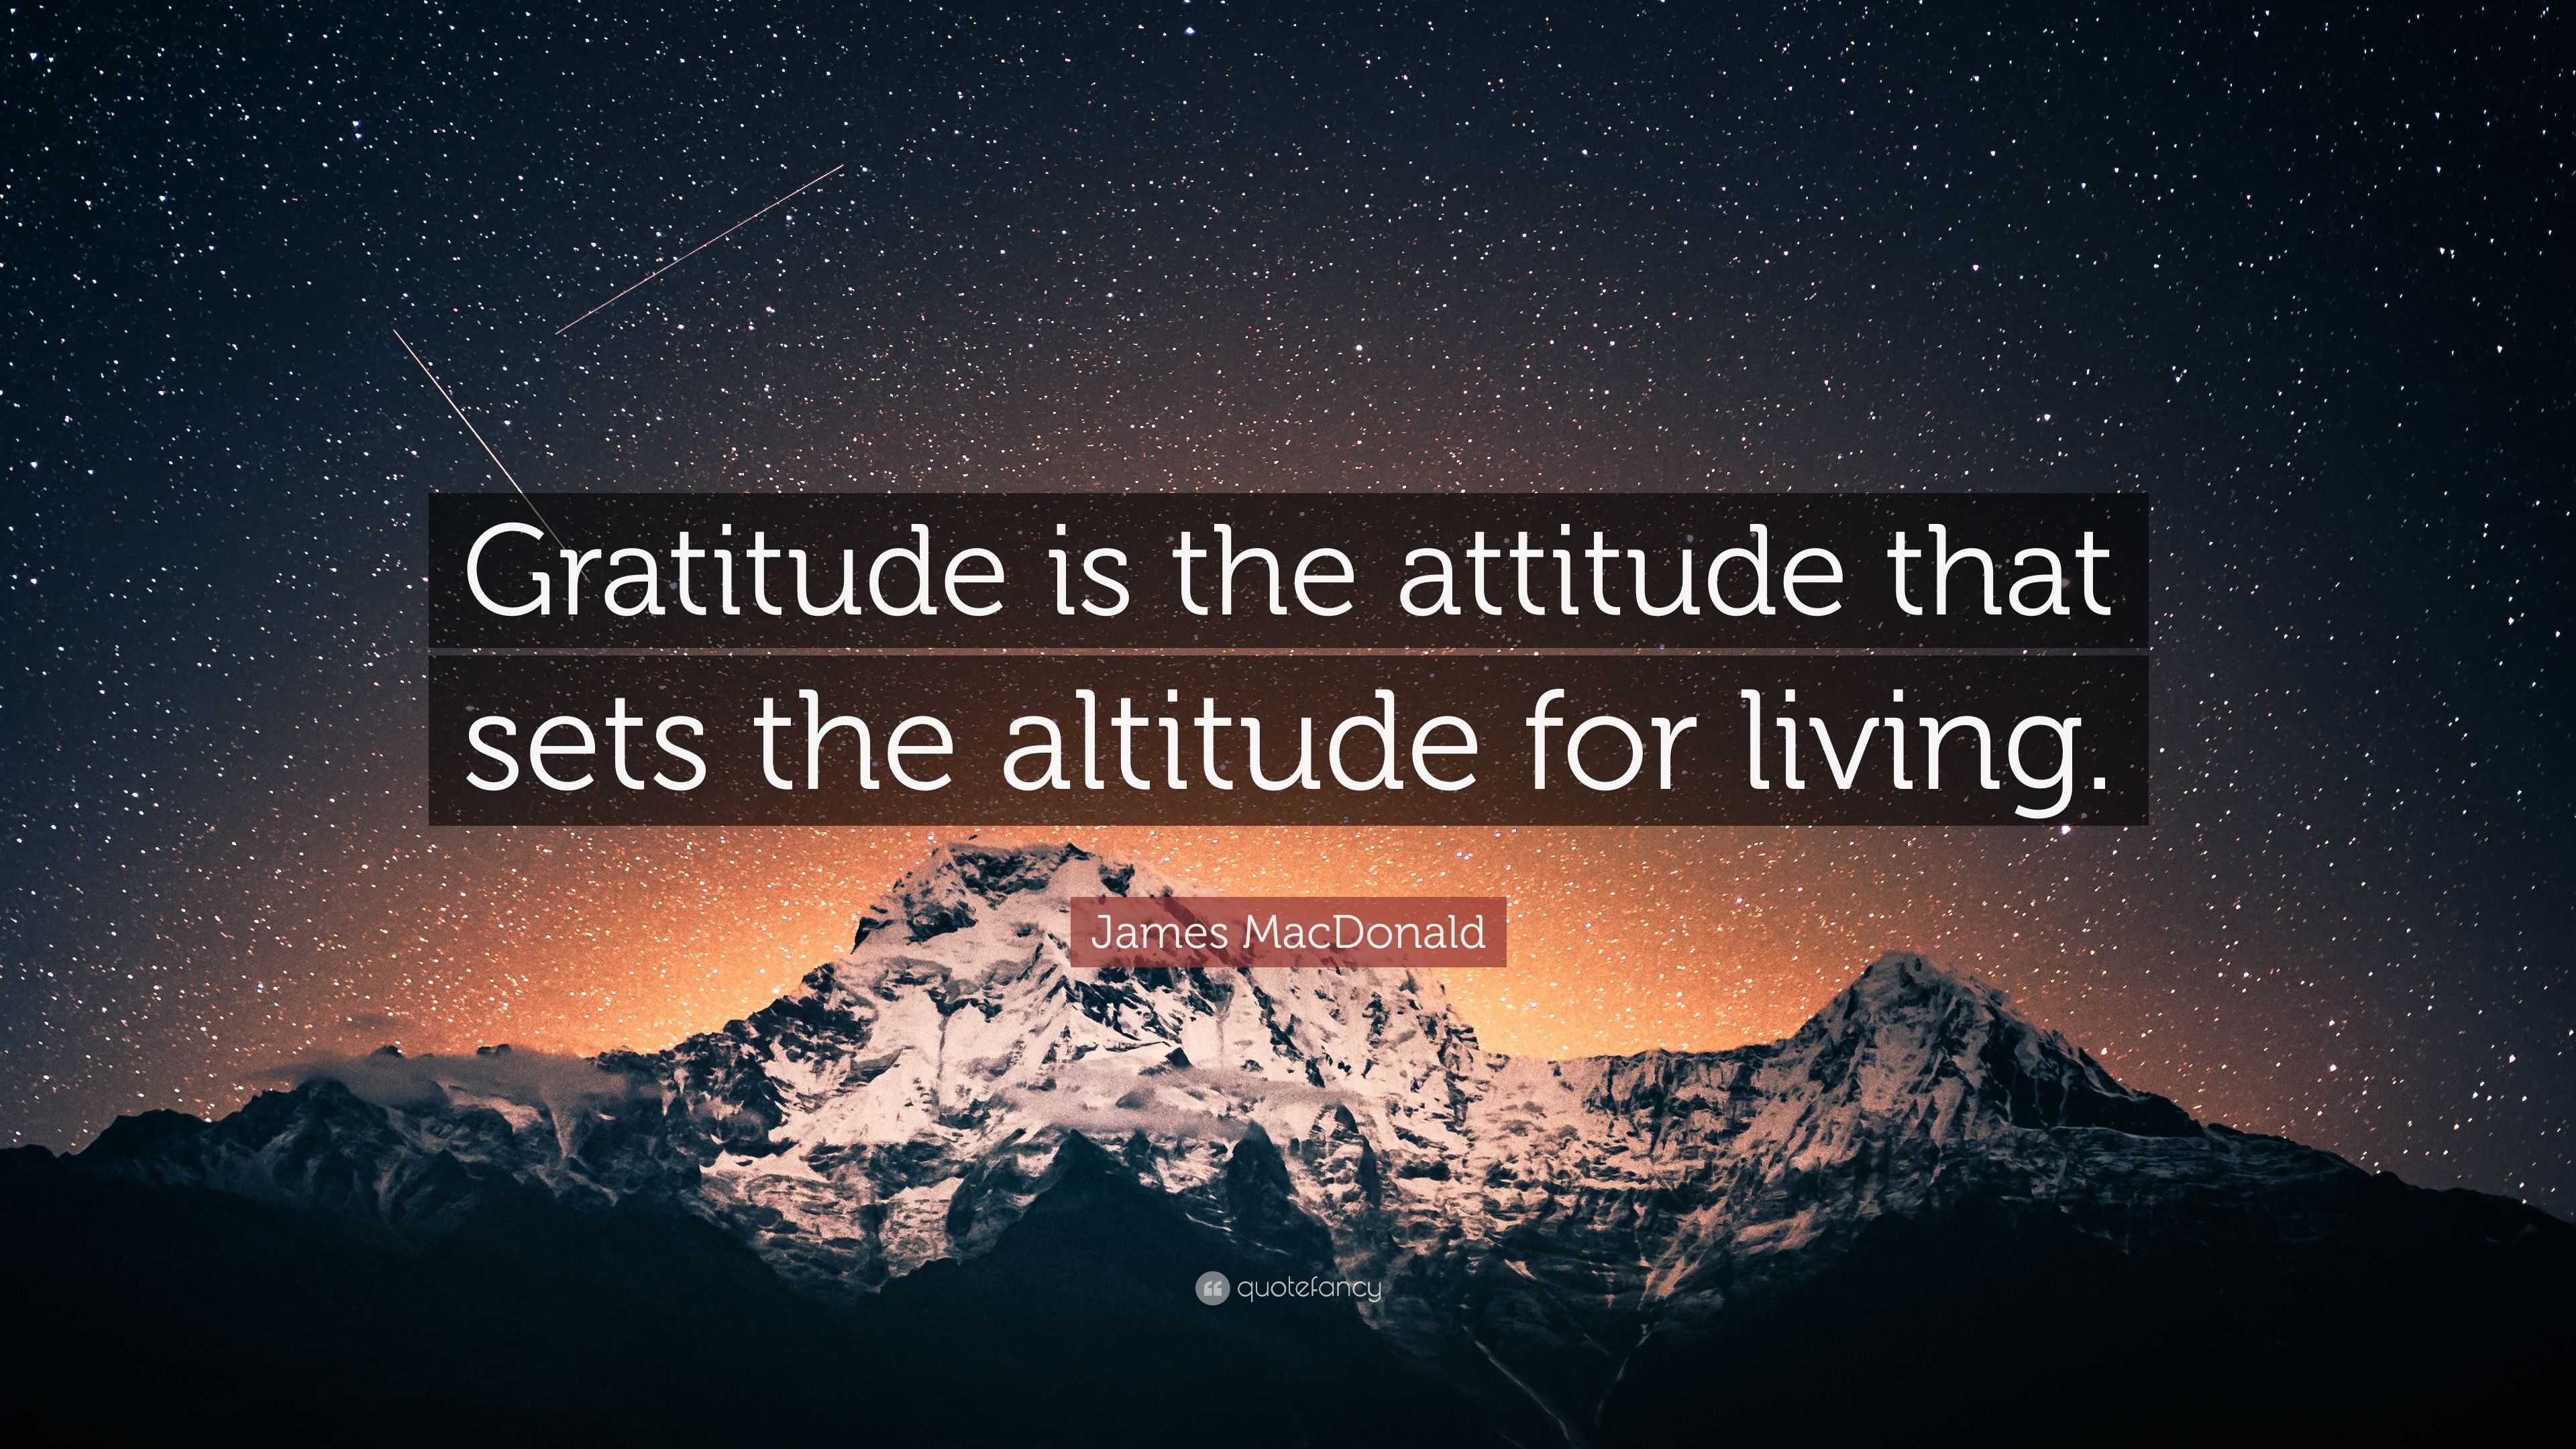 James MacDonald Quote “Gratitude is the attitude that sets the